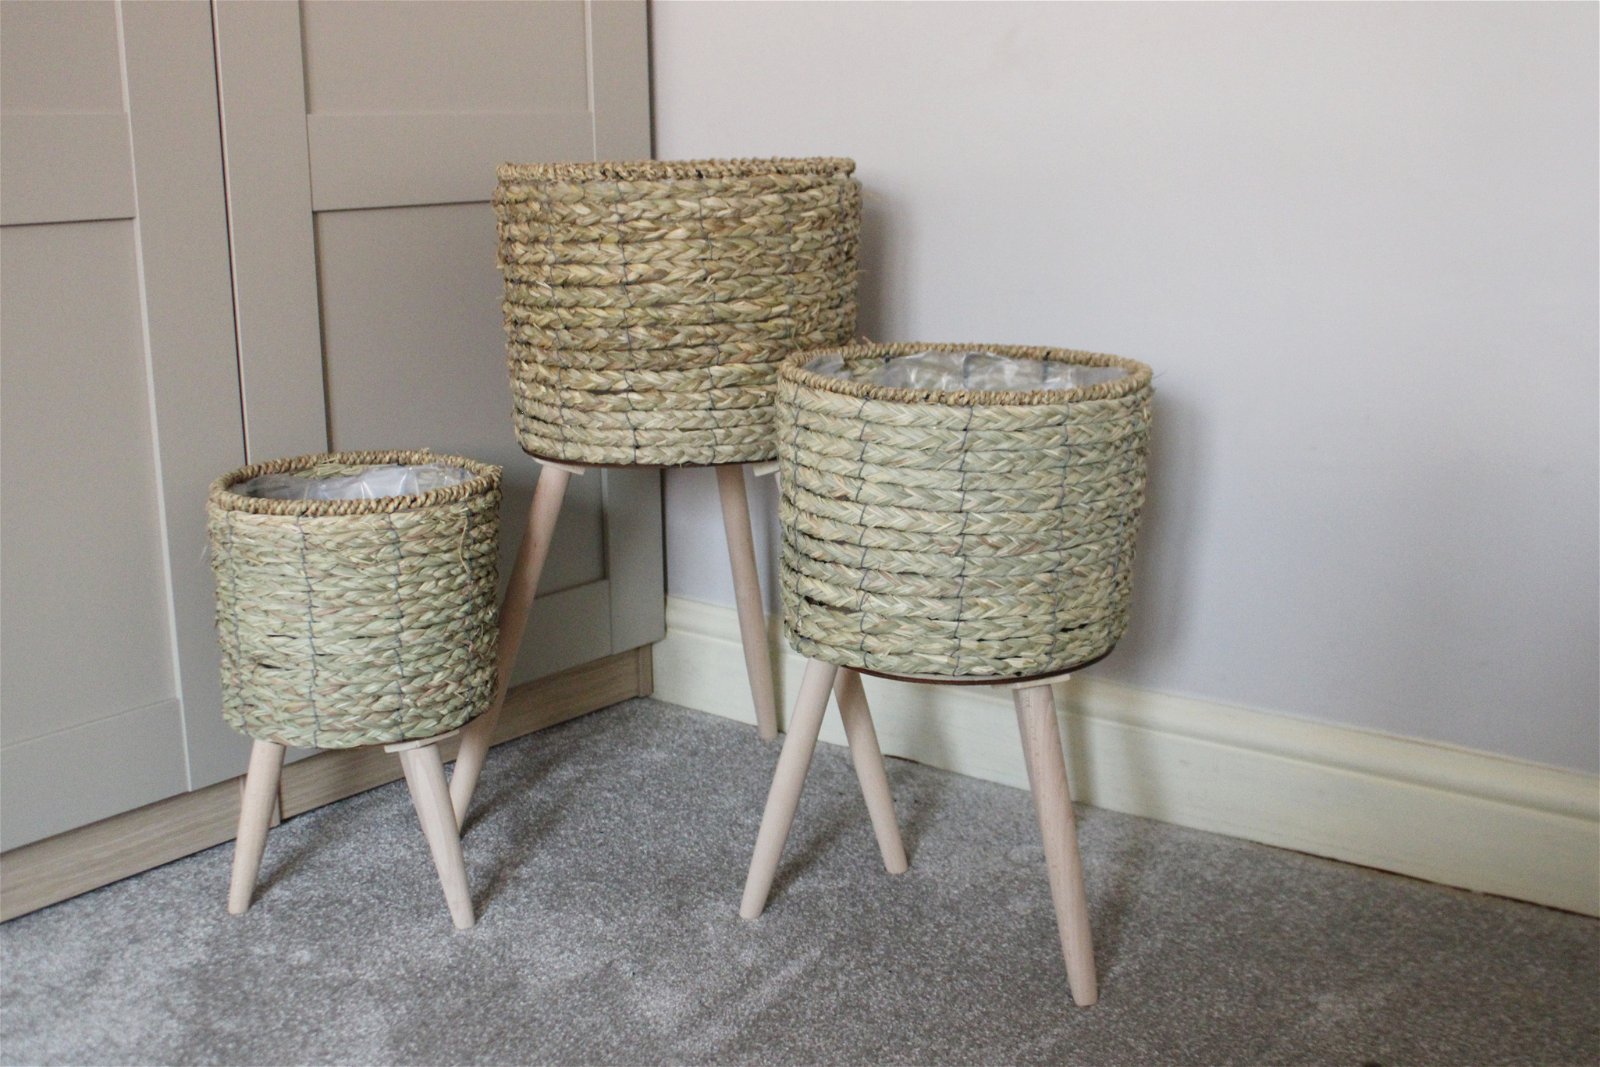 Set of Three Seagrass Planters On Stands - a Cheeky Plant